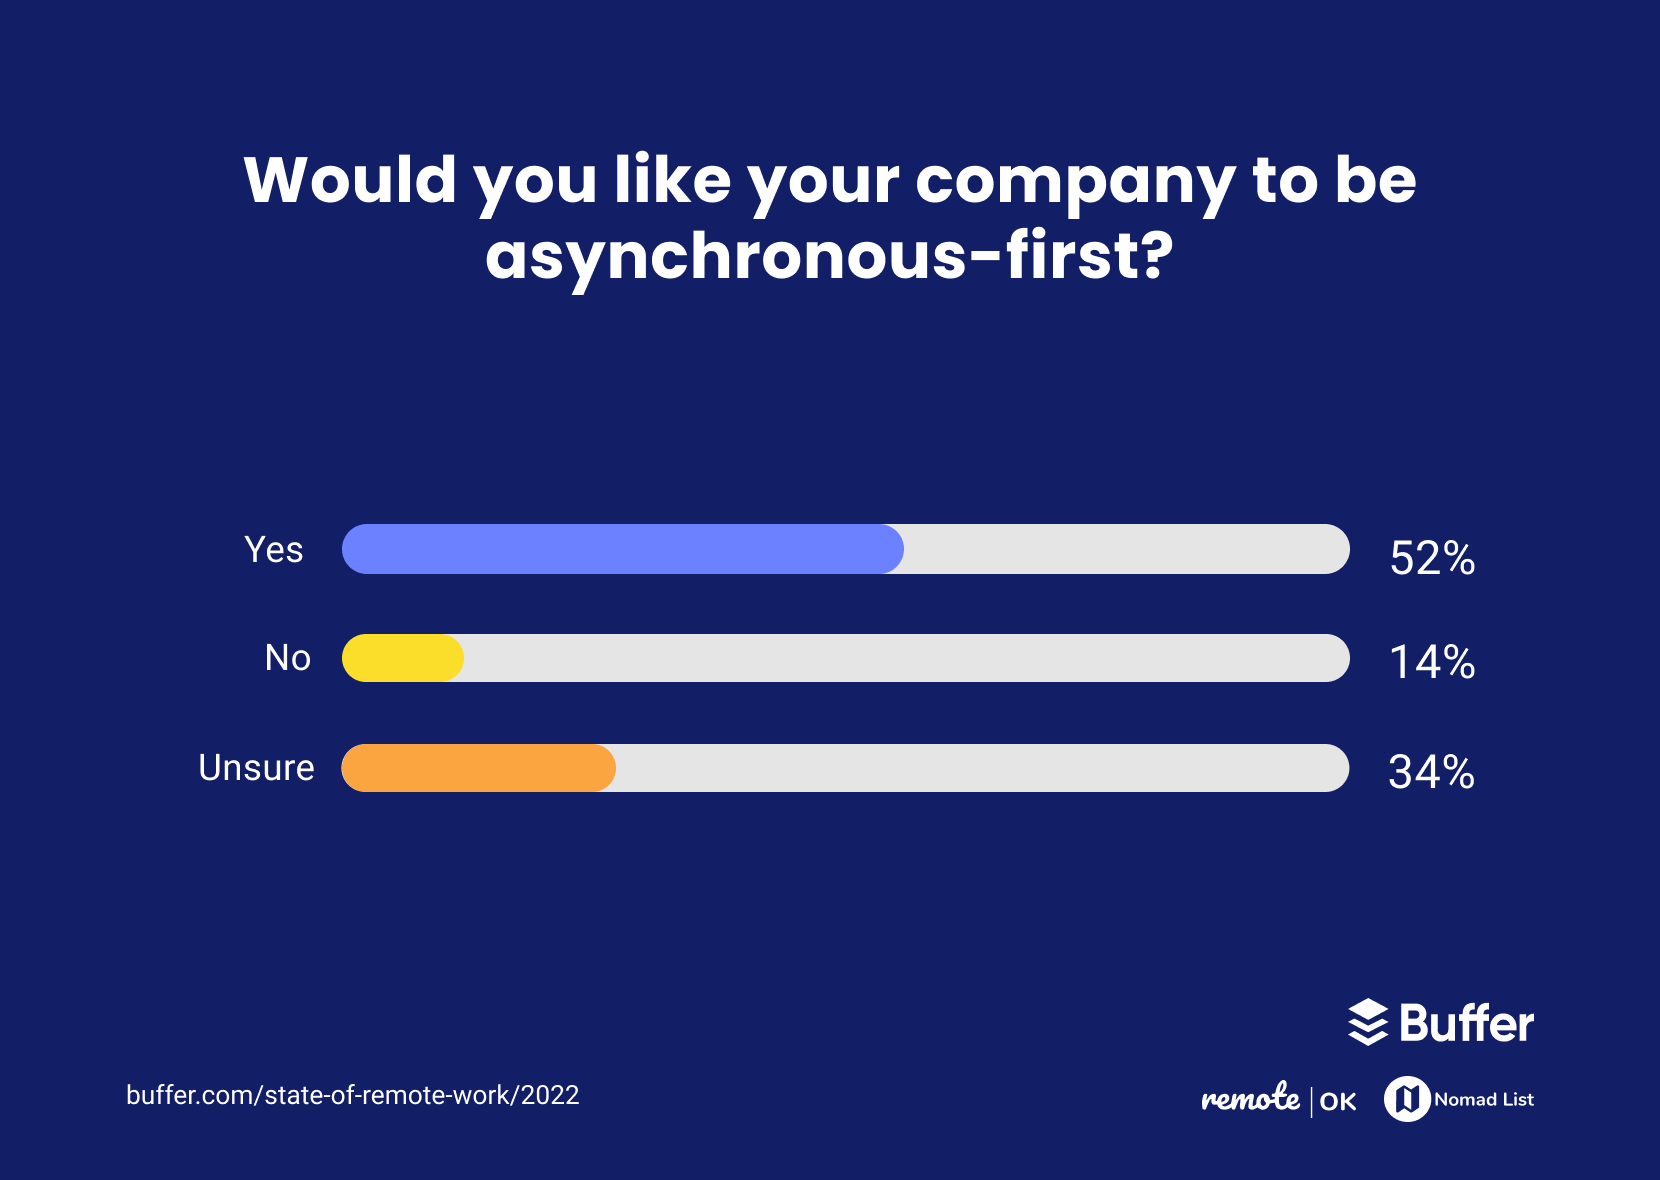 Would you like your company to be asynchronous-first?